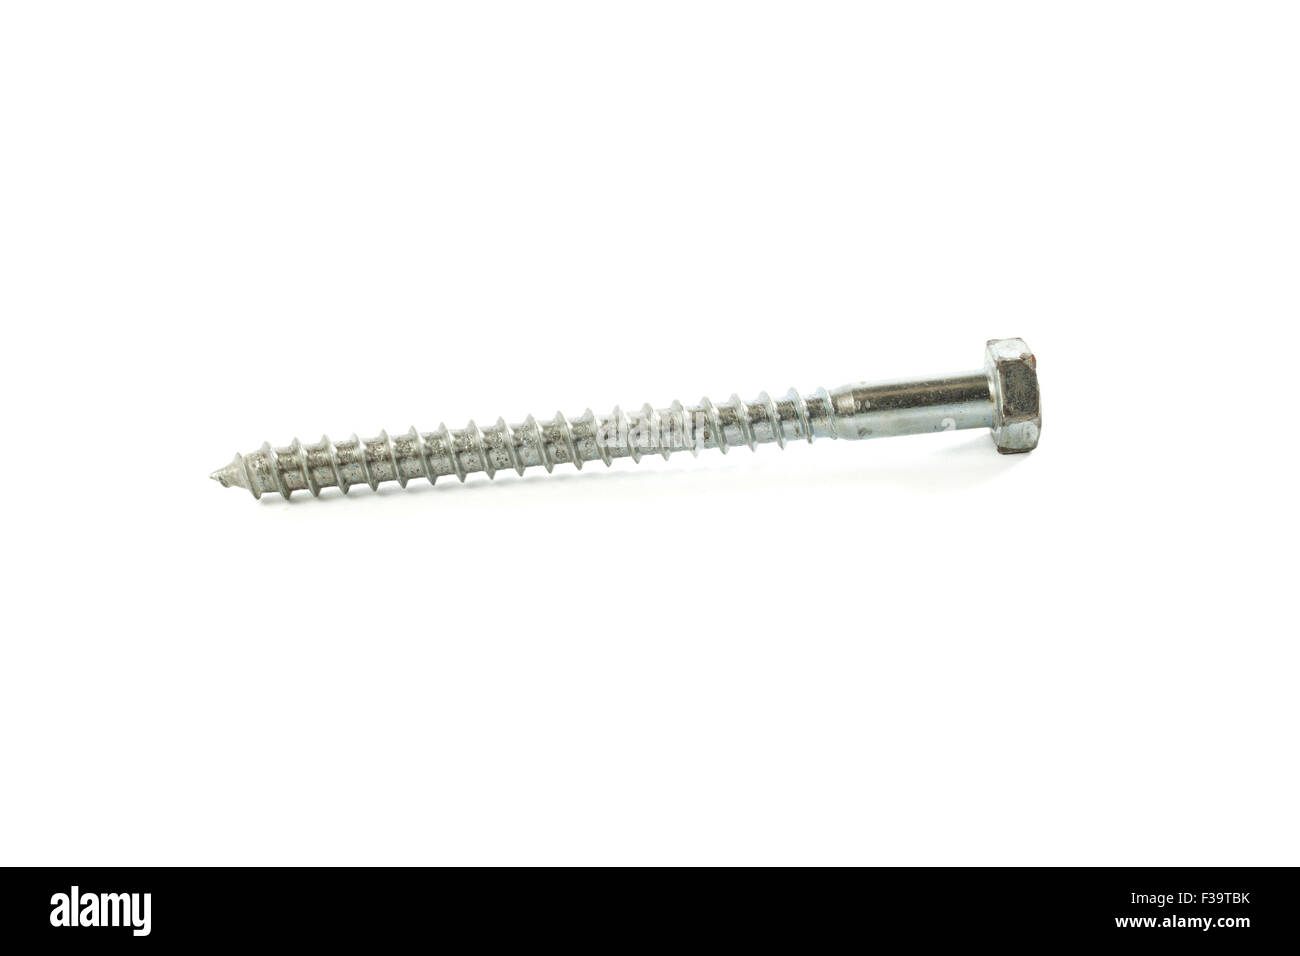 self-tapping screw isolated on white background Stock Photo